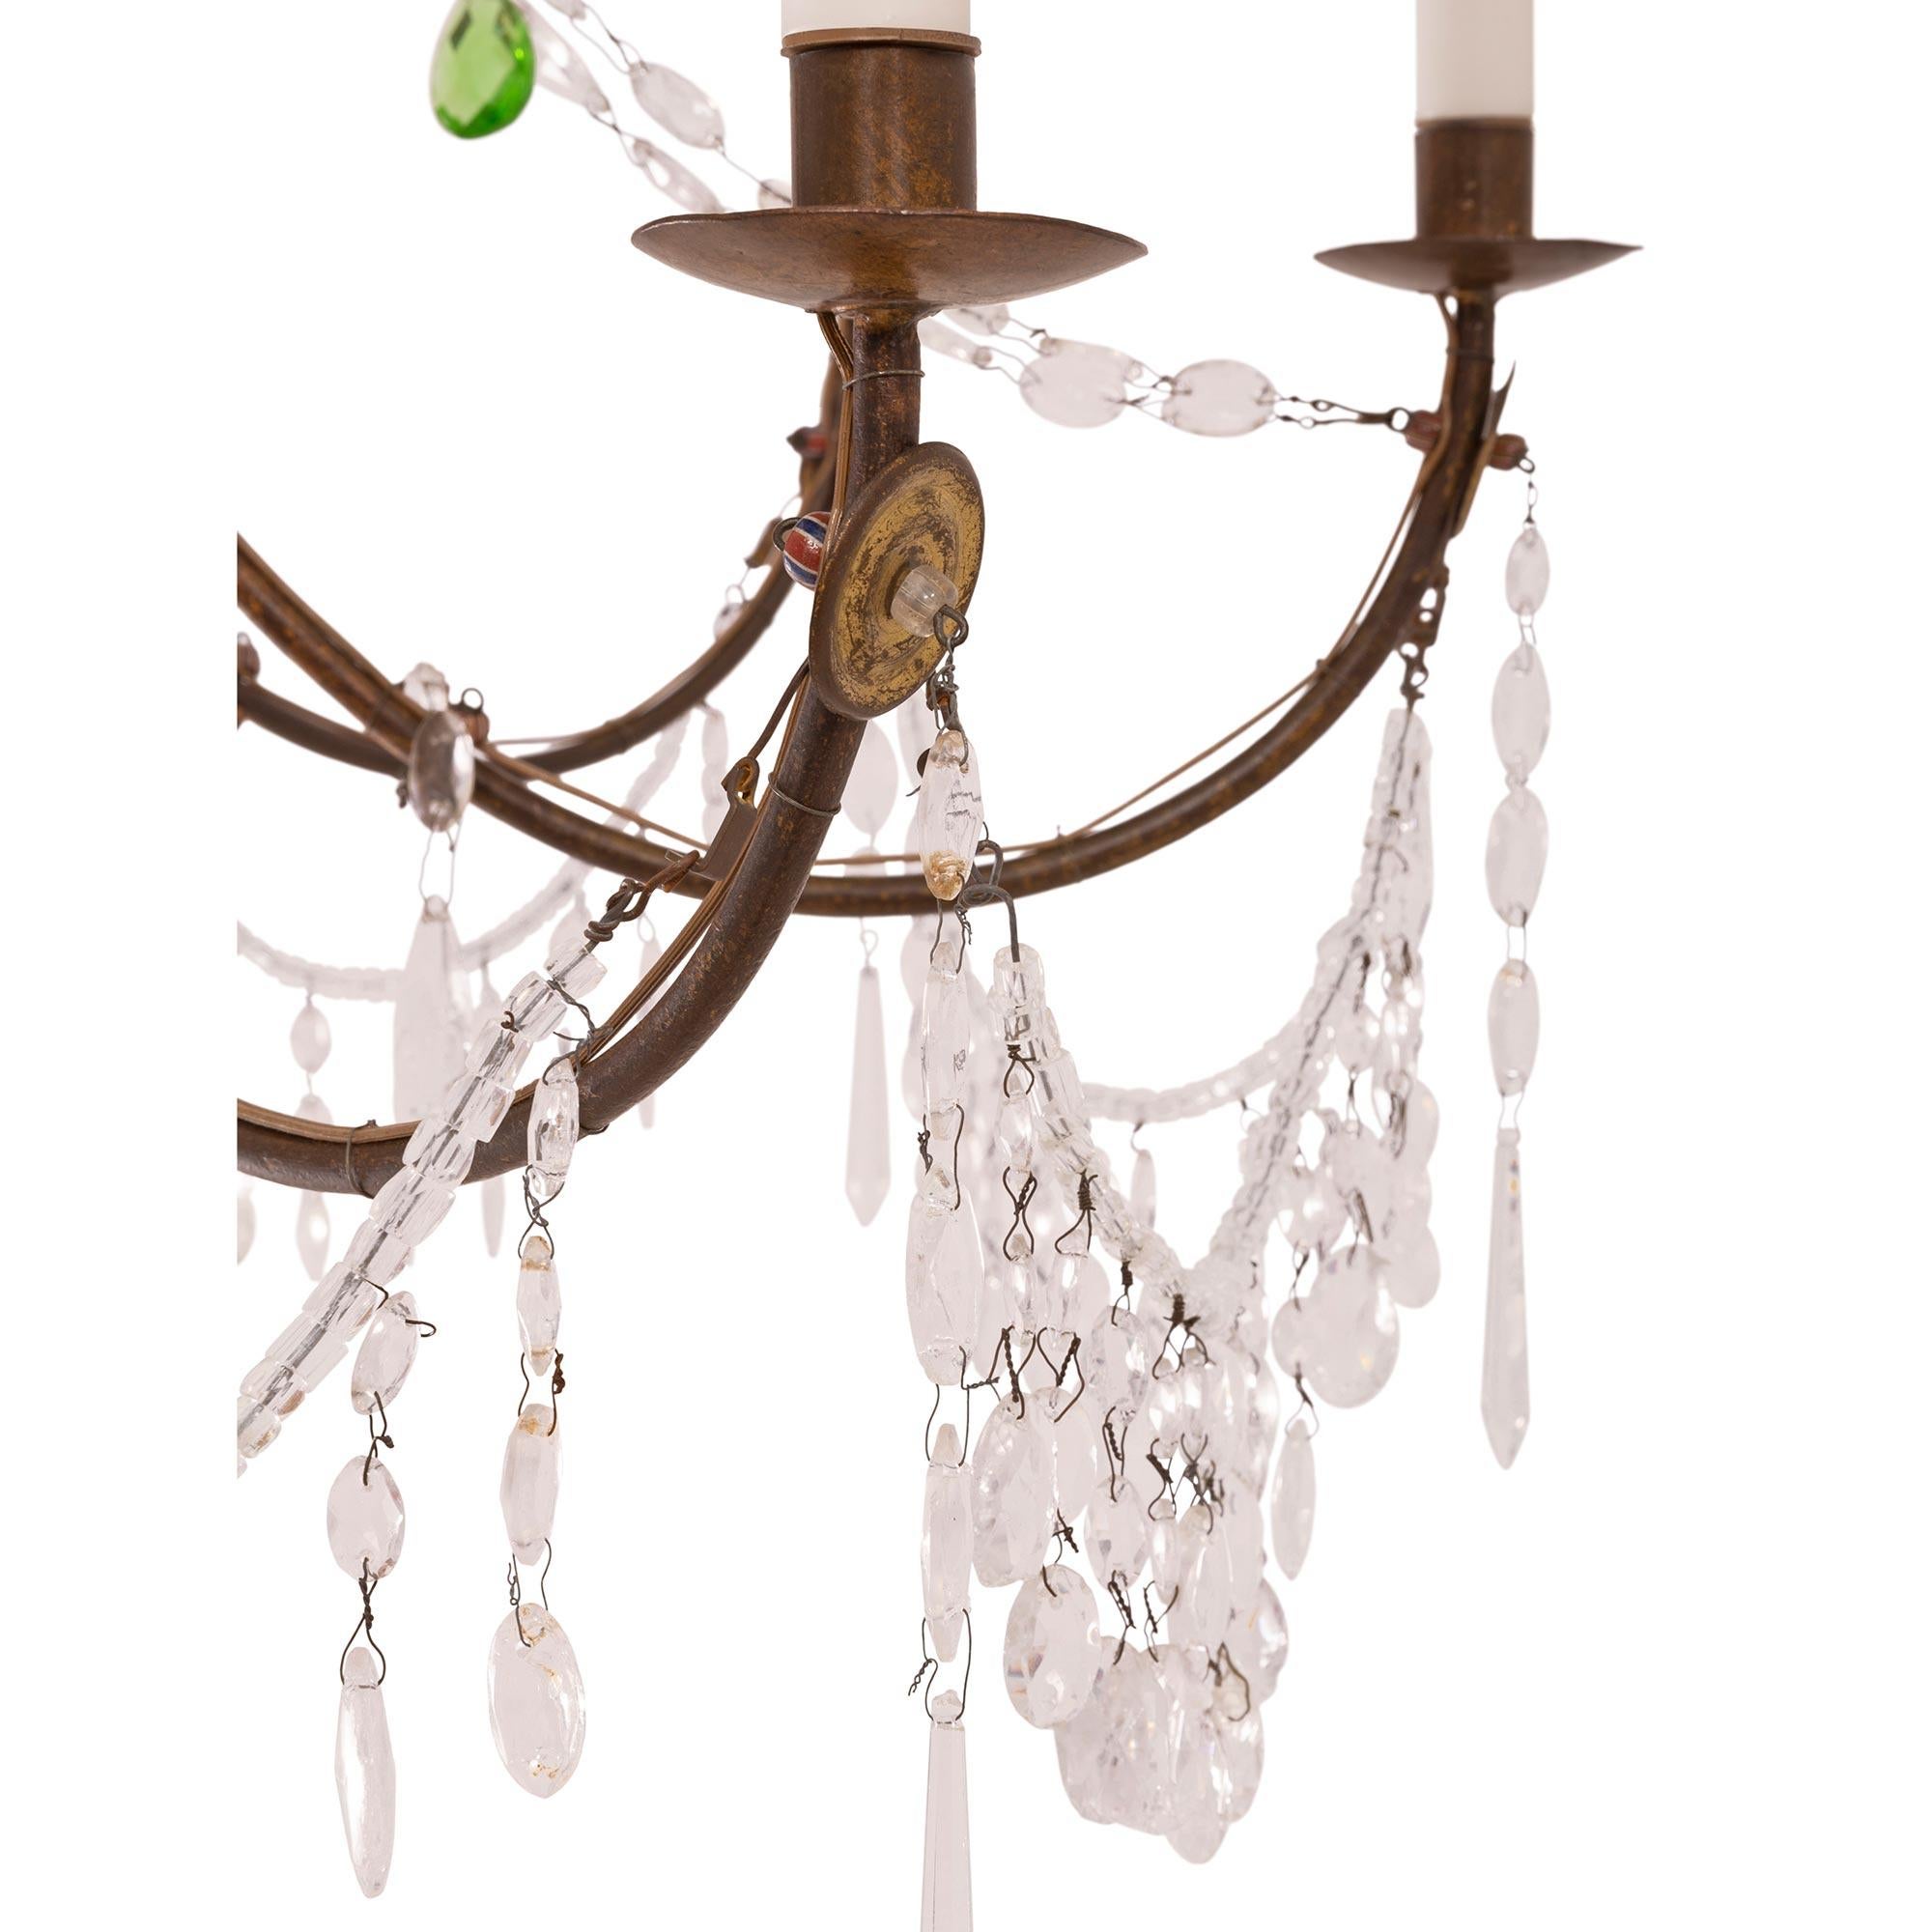 Italian Early 19th Century Mecca, Iron, Crystal, and Cut Glass Chandelier For Sale 2